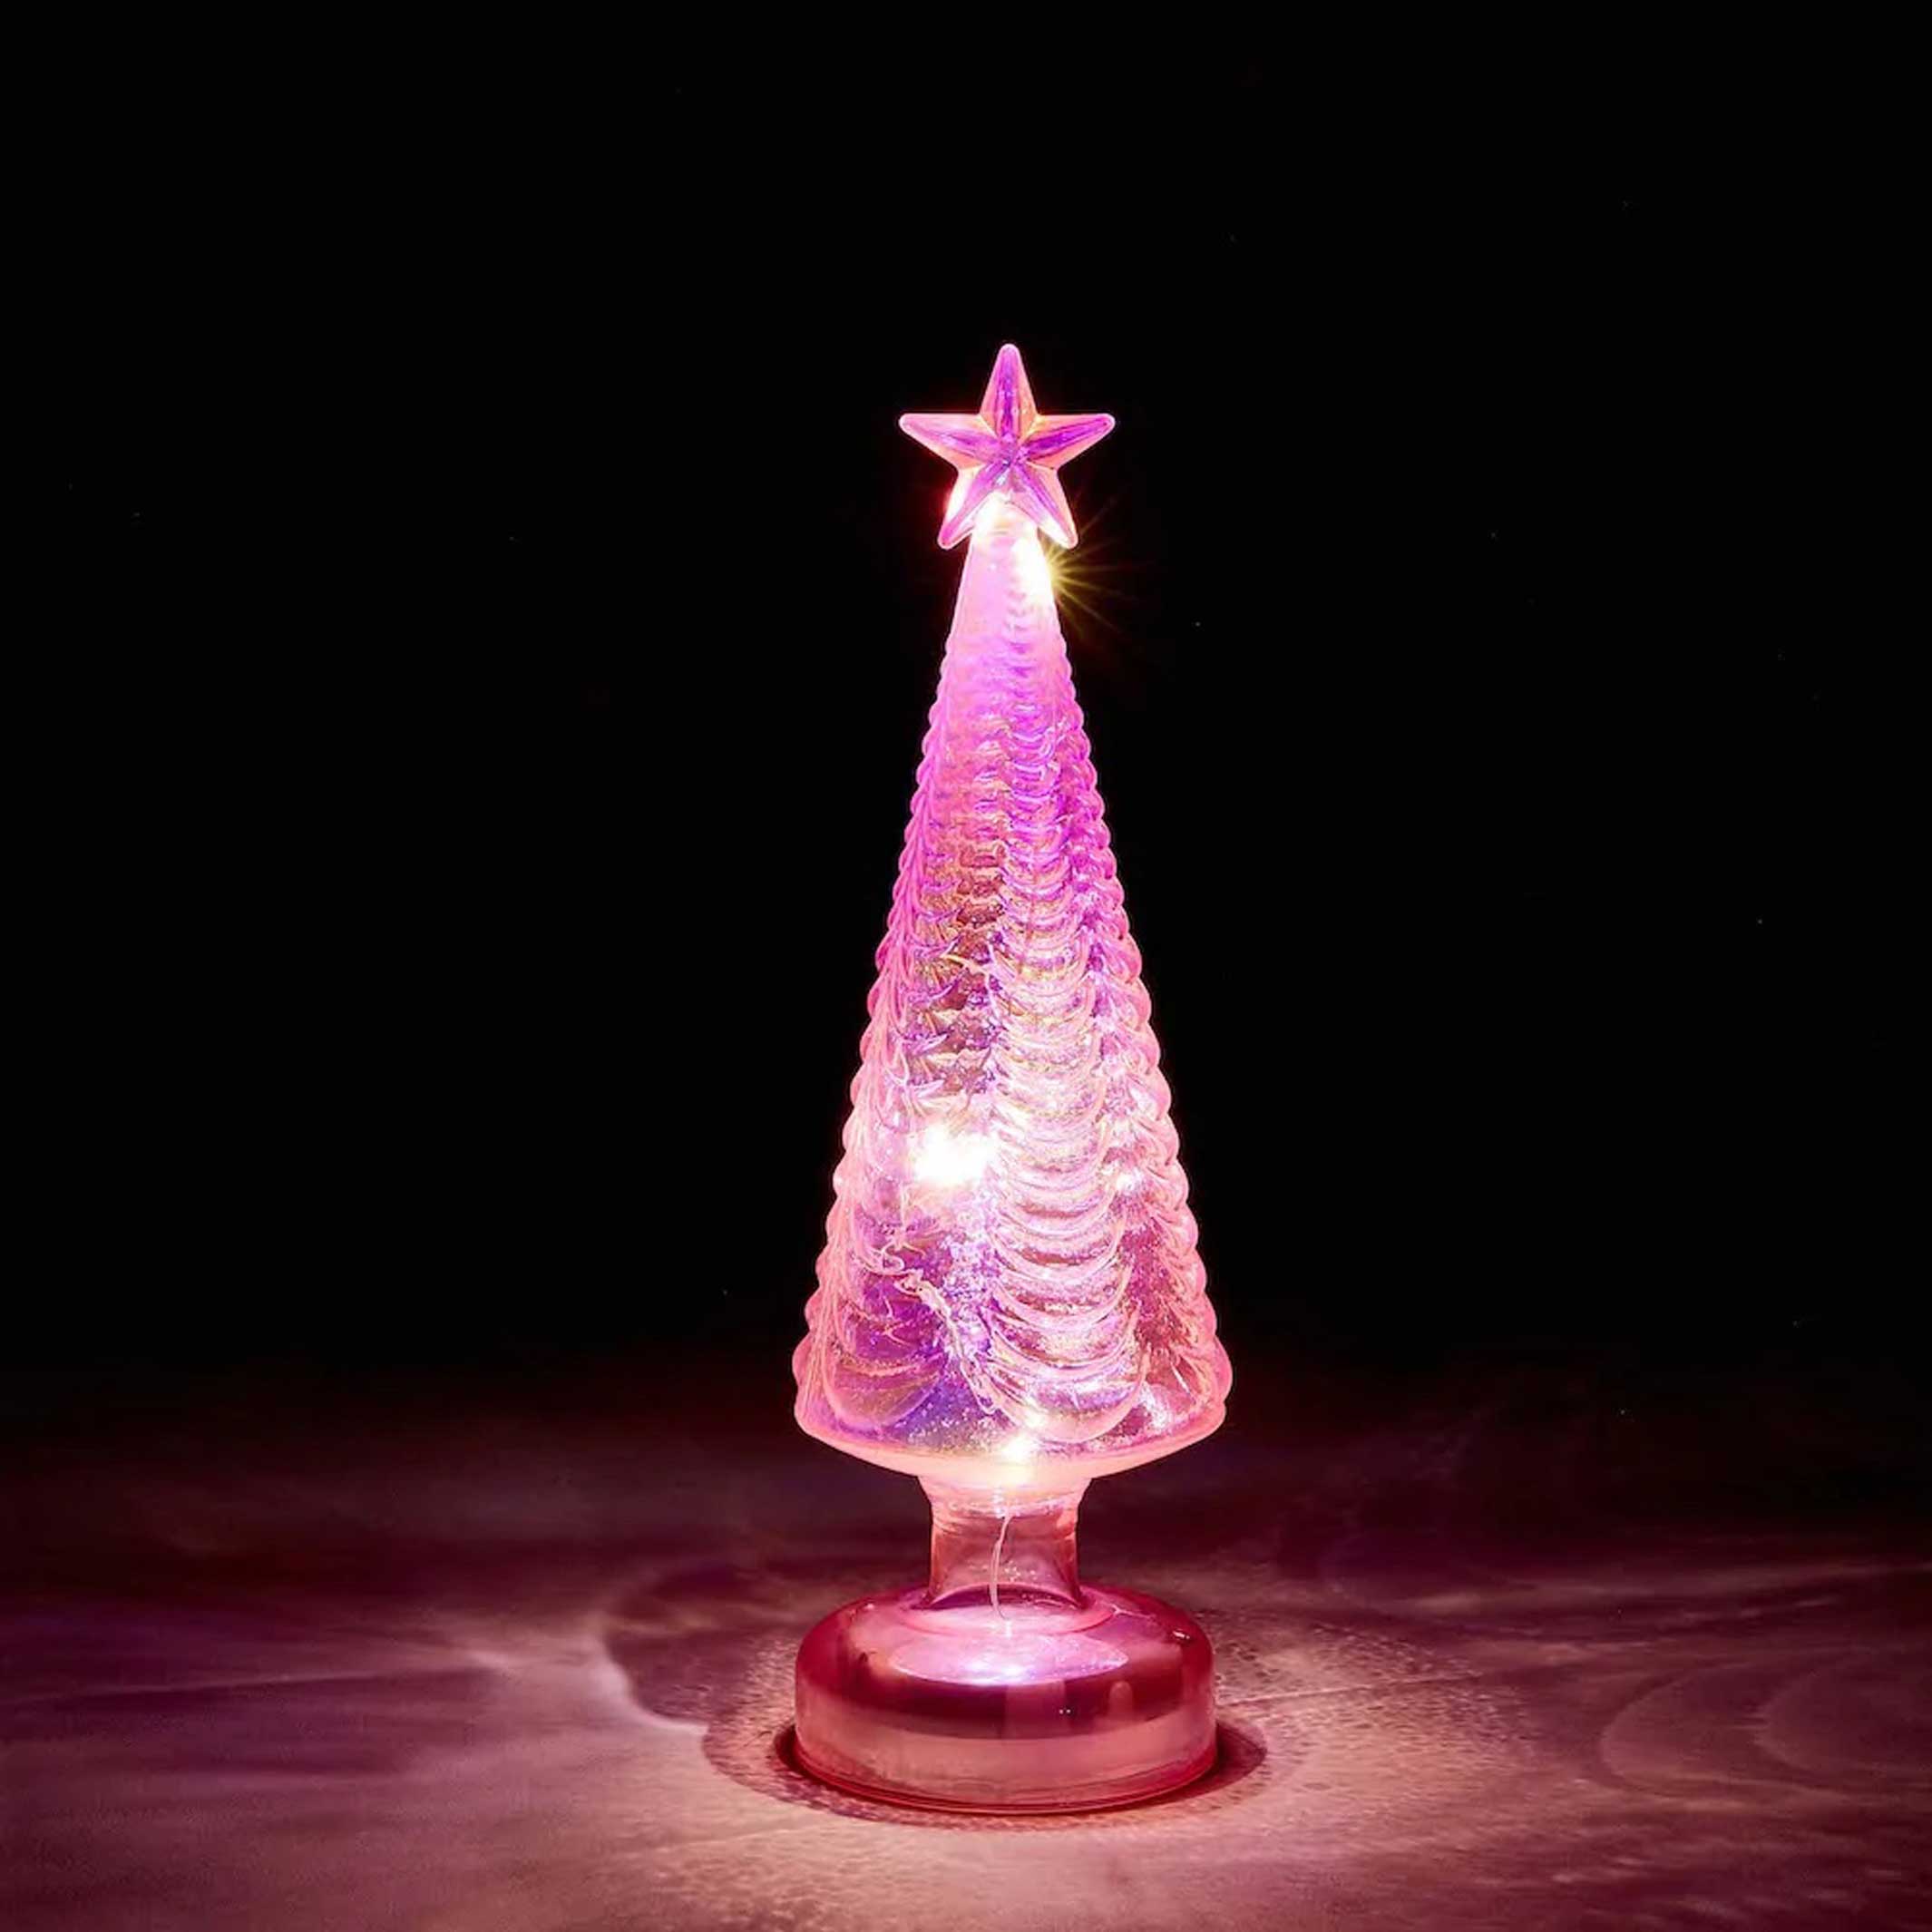 PINK STAR | LED lighted glass TREE | 23 cm high | MoMA